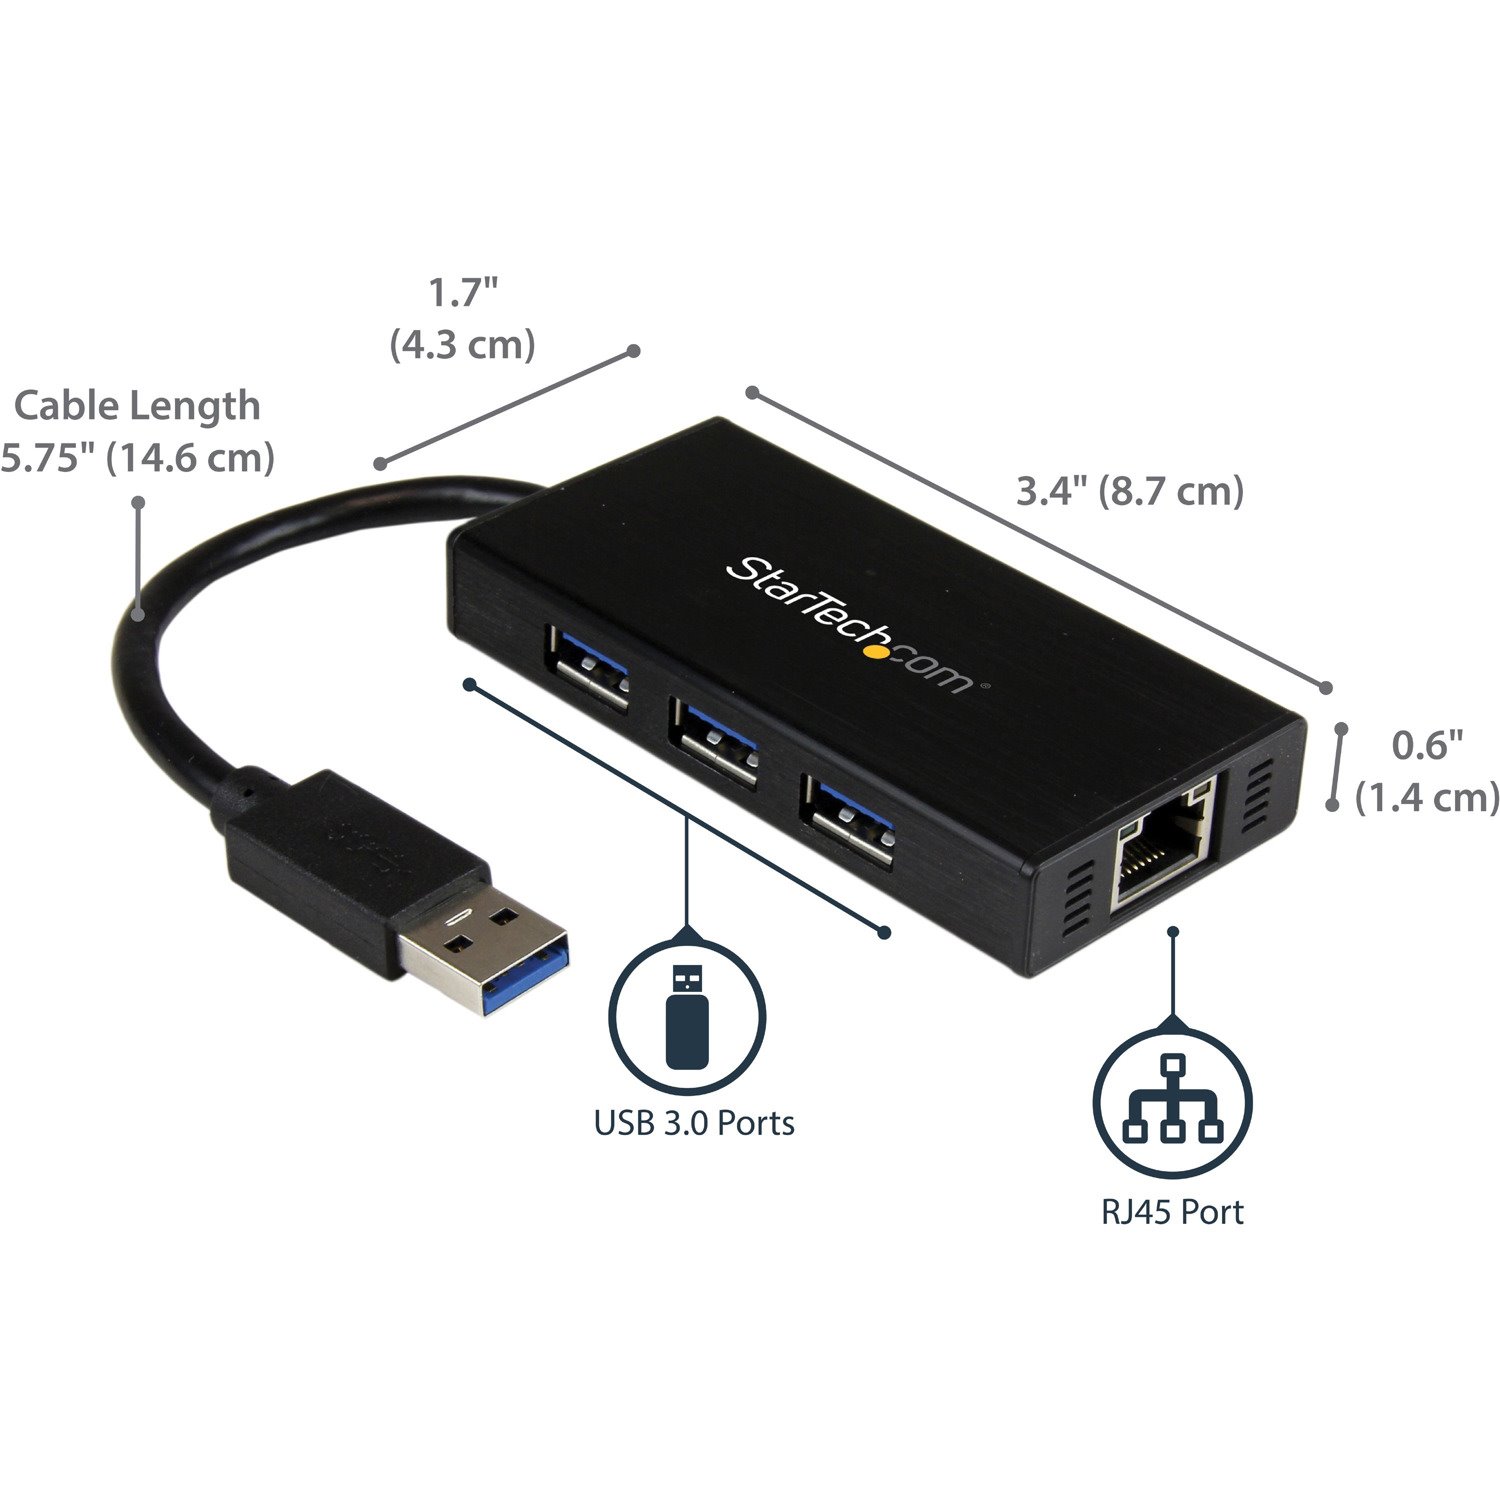 StarTech.com 3 Port Portable USB 3.0 Hub with Gigabit Ethernet Adapter NIC - 5Gbps - Aluminum w/ Cable